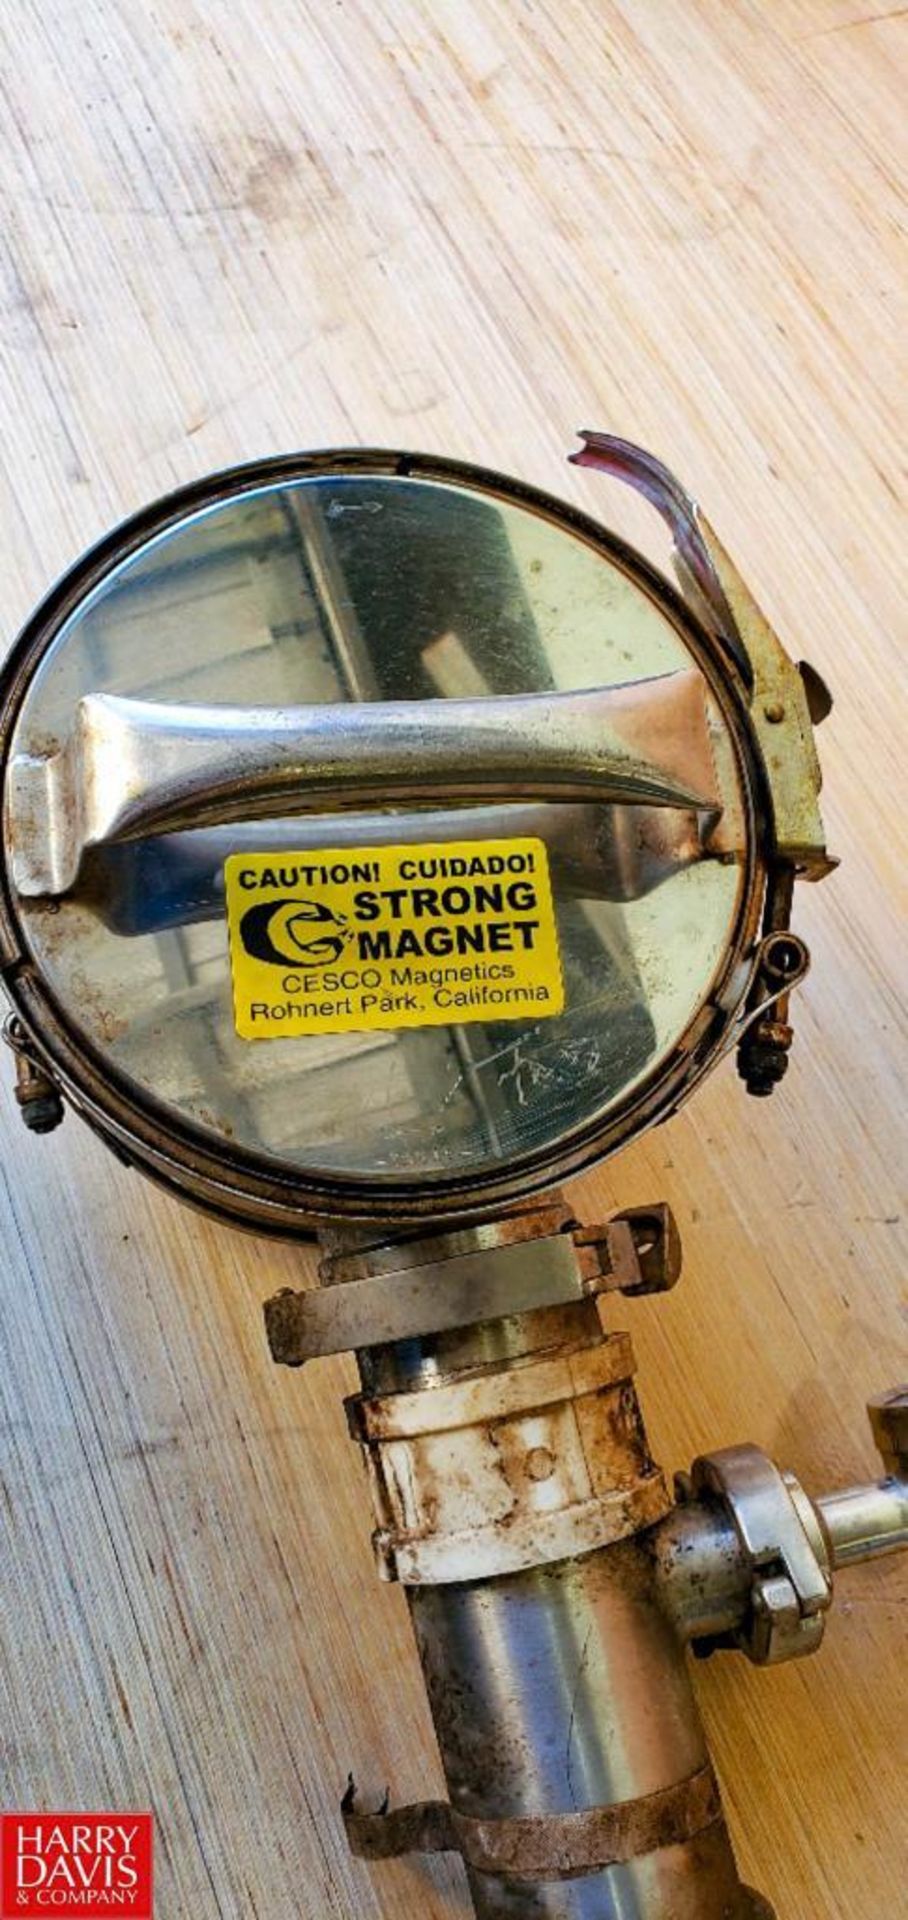 Cesco S/S Magnetic Trap 3" with Saniflow Thermometer (Location: Miami, FL) - Rigging Fee: $40 - Image 3 of 3